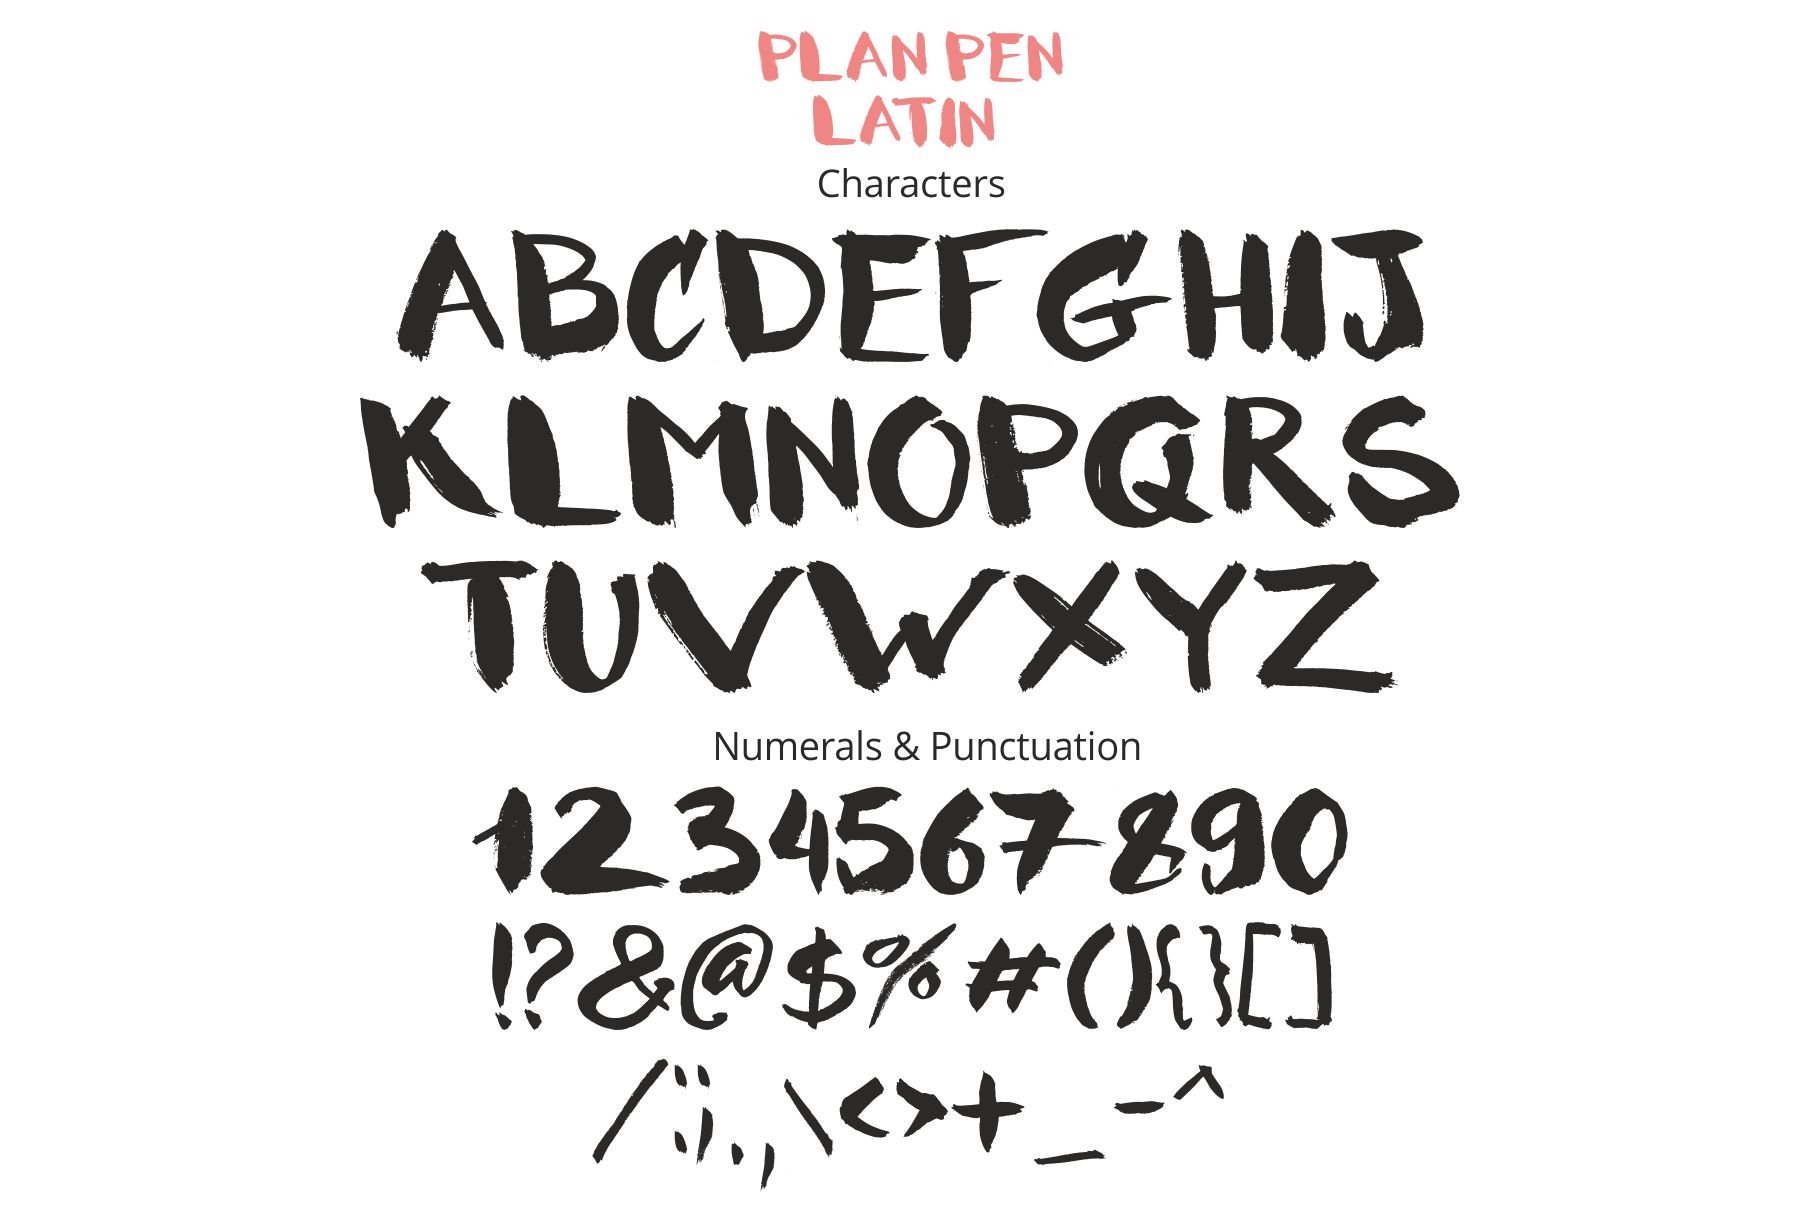 Brush strokes and hand-drawn lettering, inspired me to create this font. 